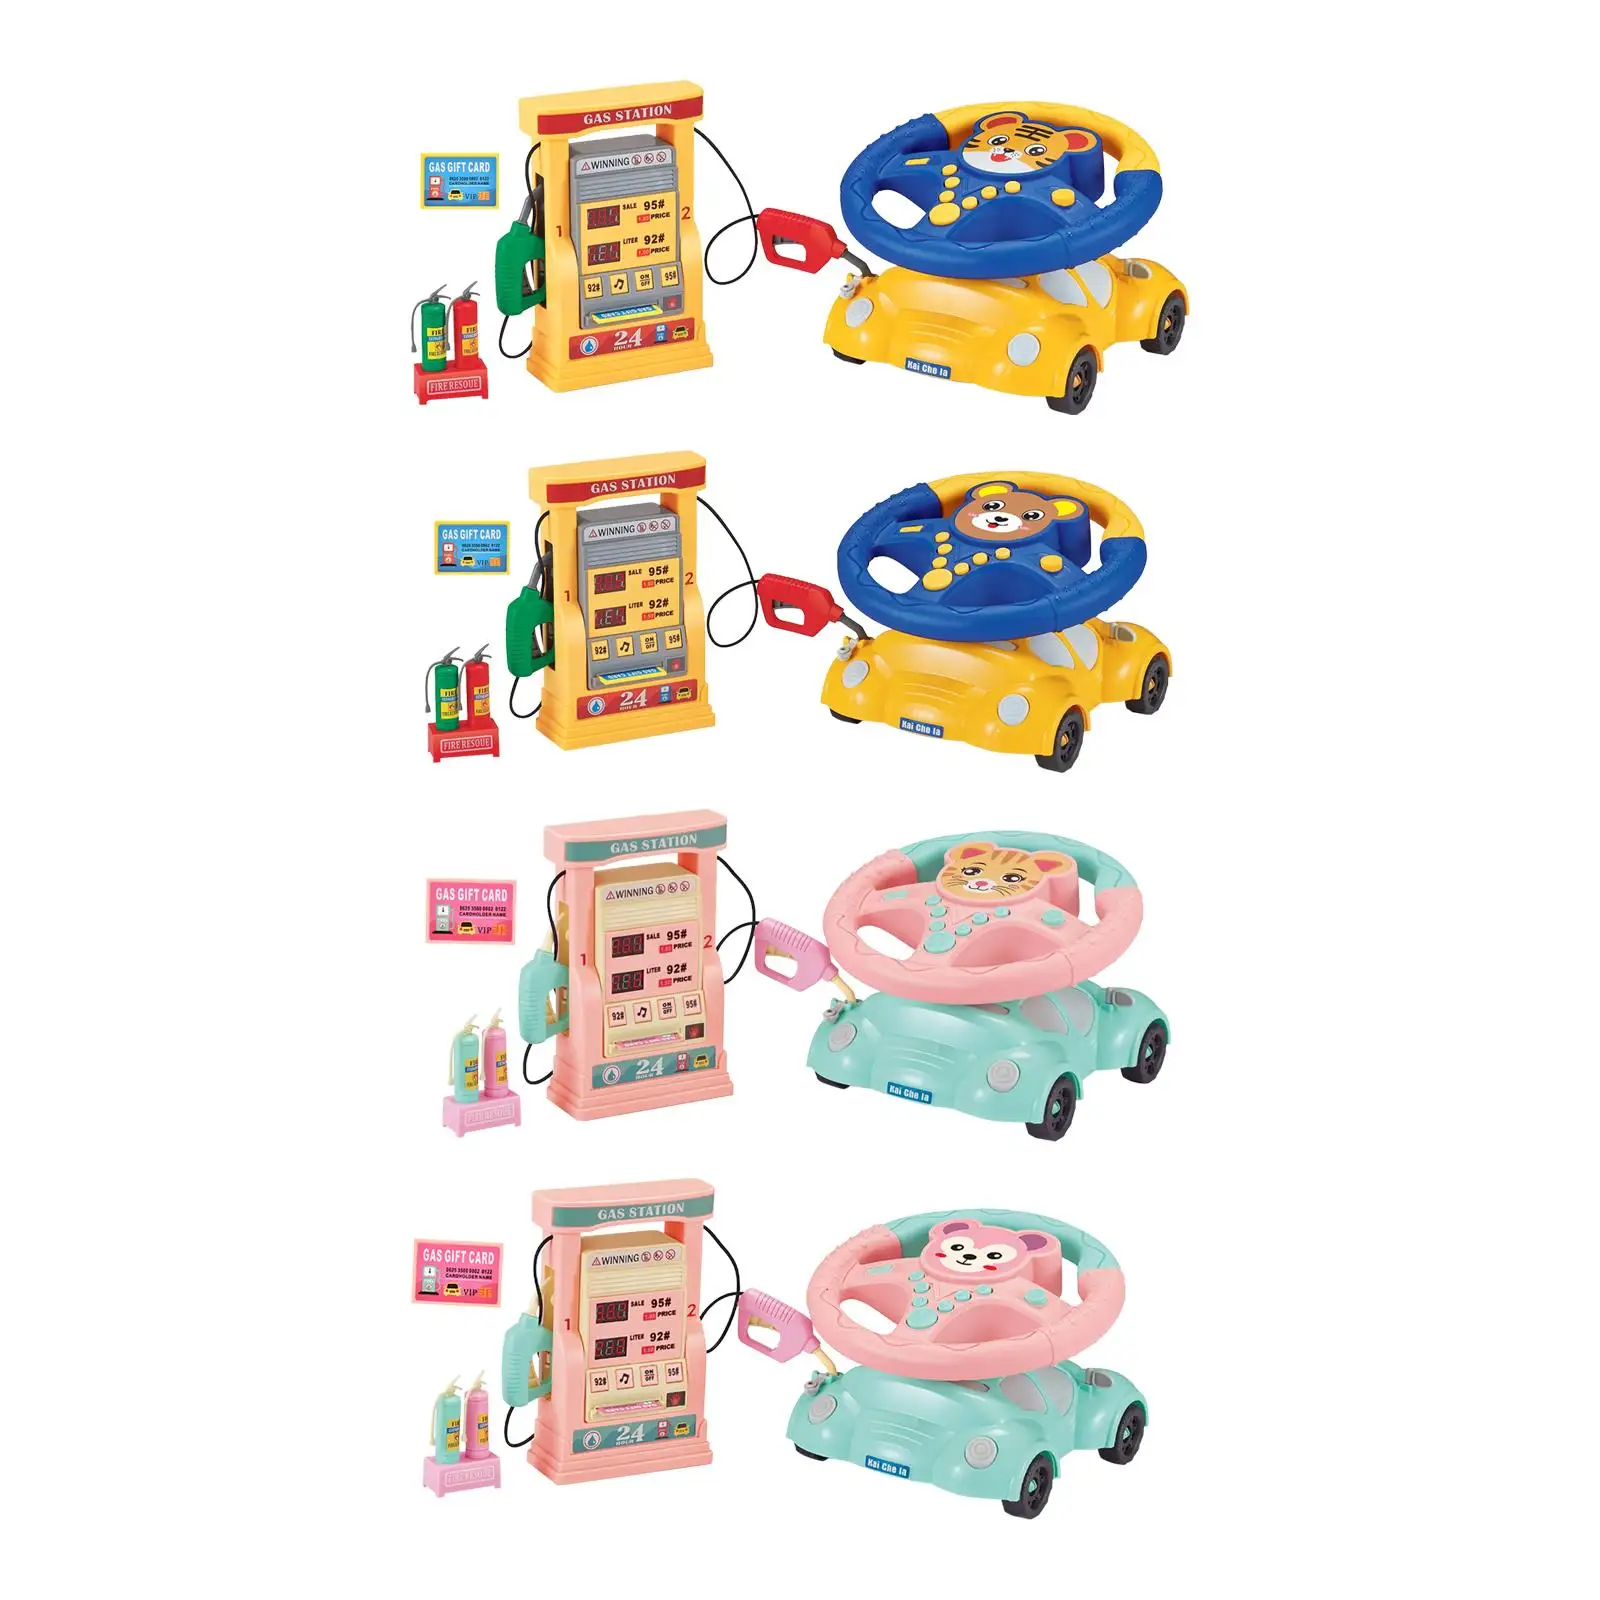 Steering Wheel Toy Pretend Play Sensory Toy Puzzle Game for Kids Children